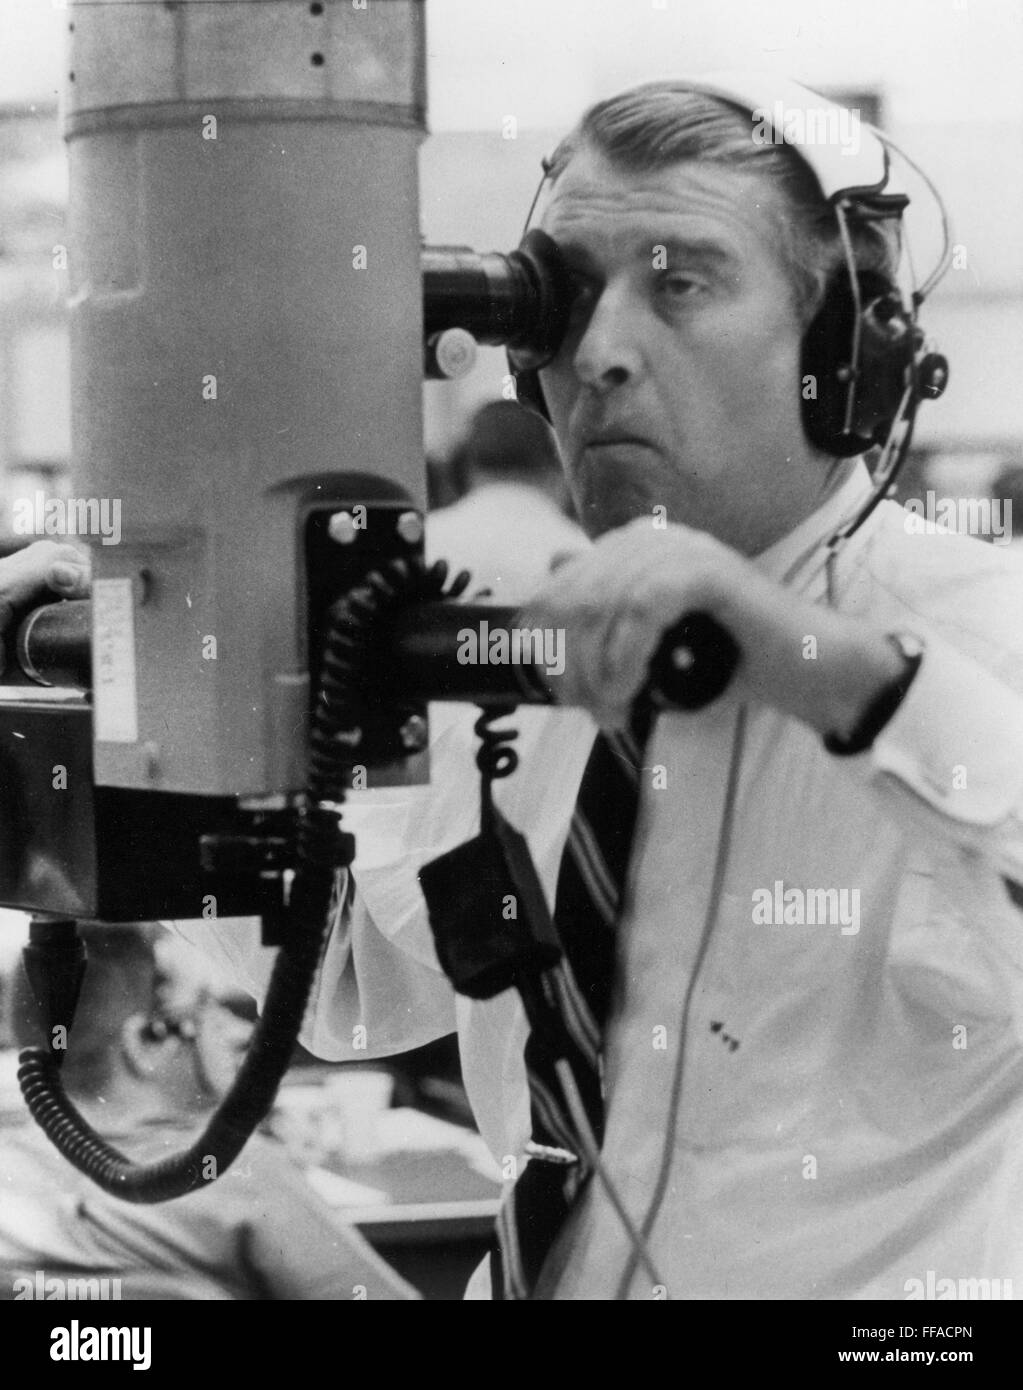 WERNHER von BRAUN /n(1912-1977). German rocket engineer. Observing the successful launch of the satellite Saturn I through a persicope at Cape Kennedy, Florida, 29 January 1964. Stock Photo